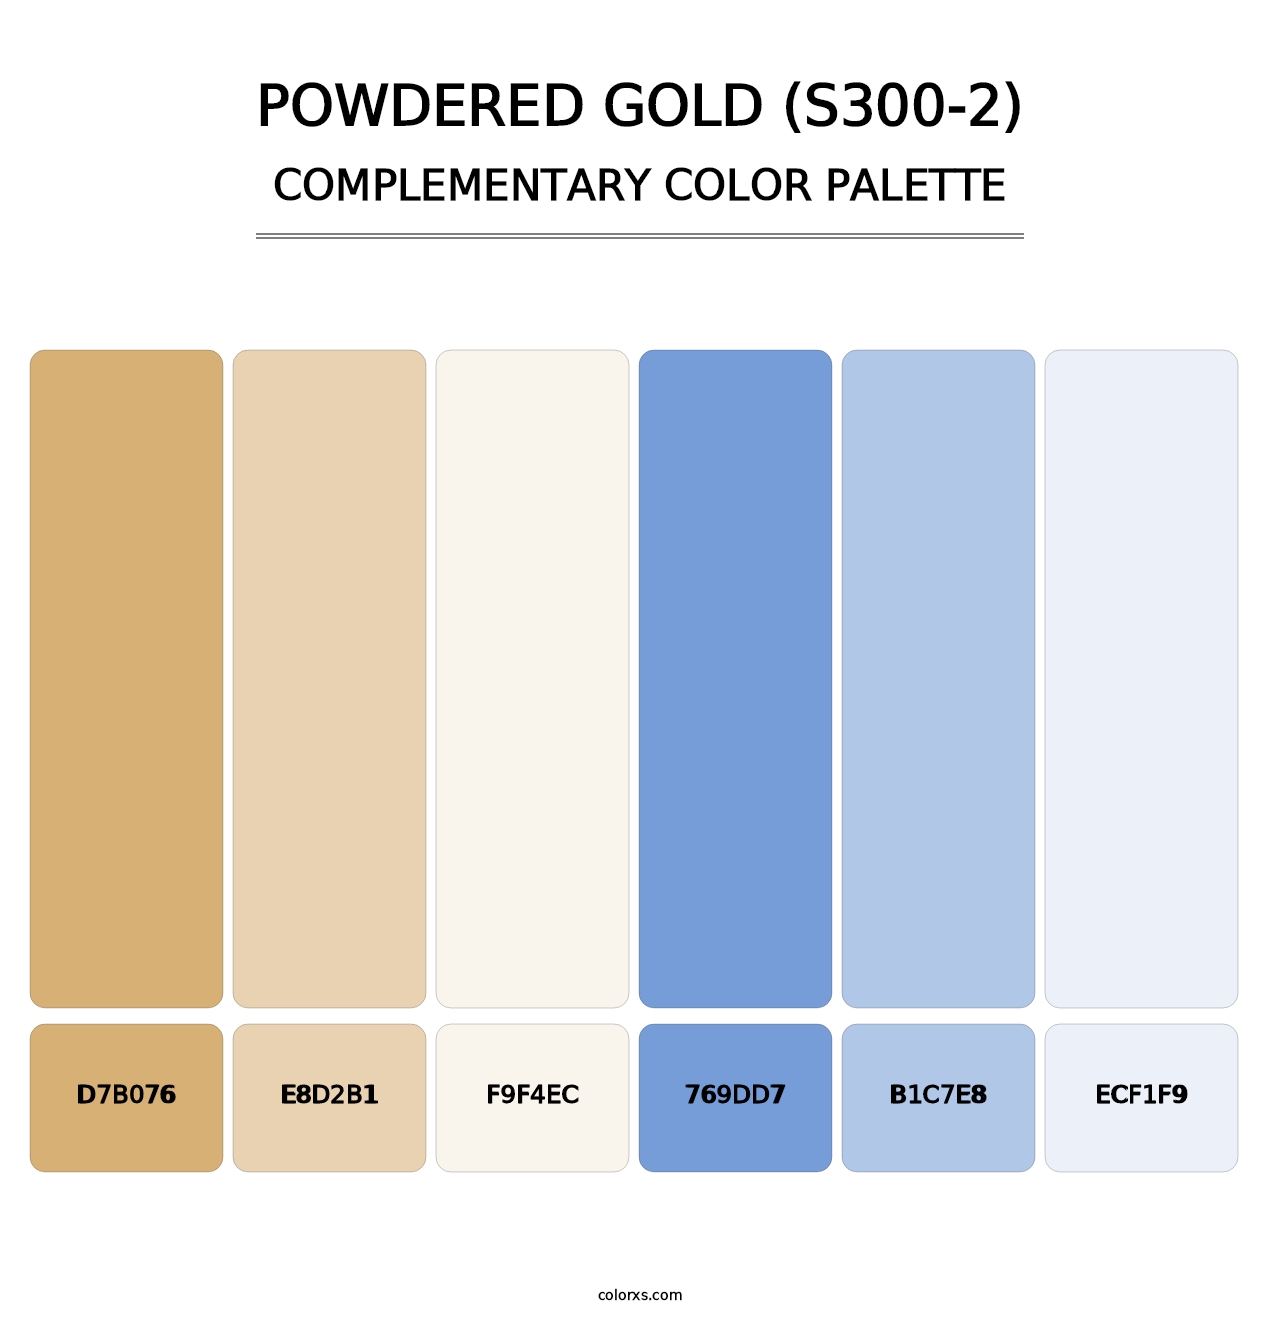 Powdered Gold (S300-2) - Complementary Color Palette